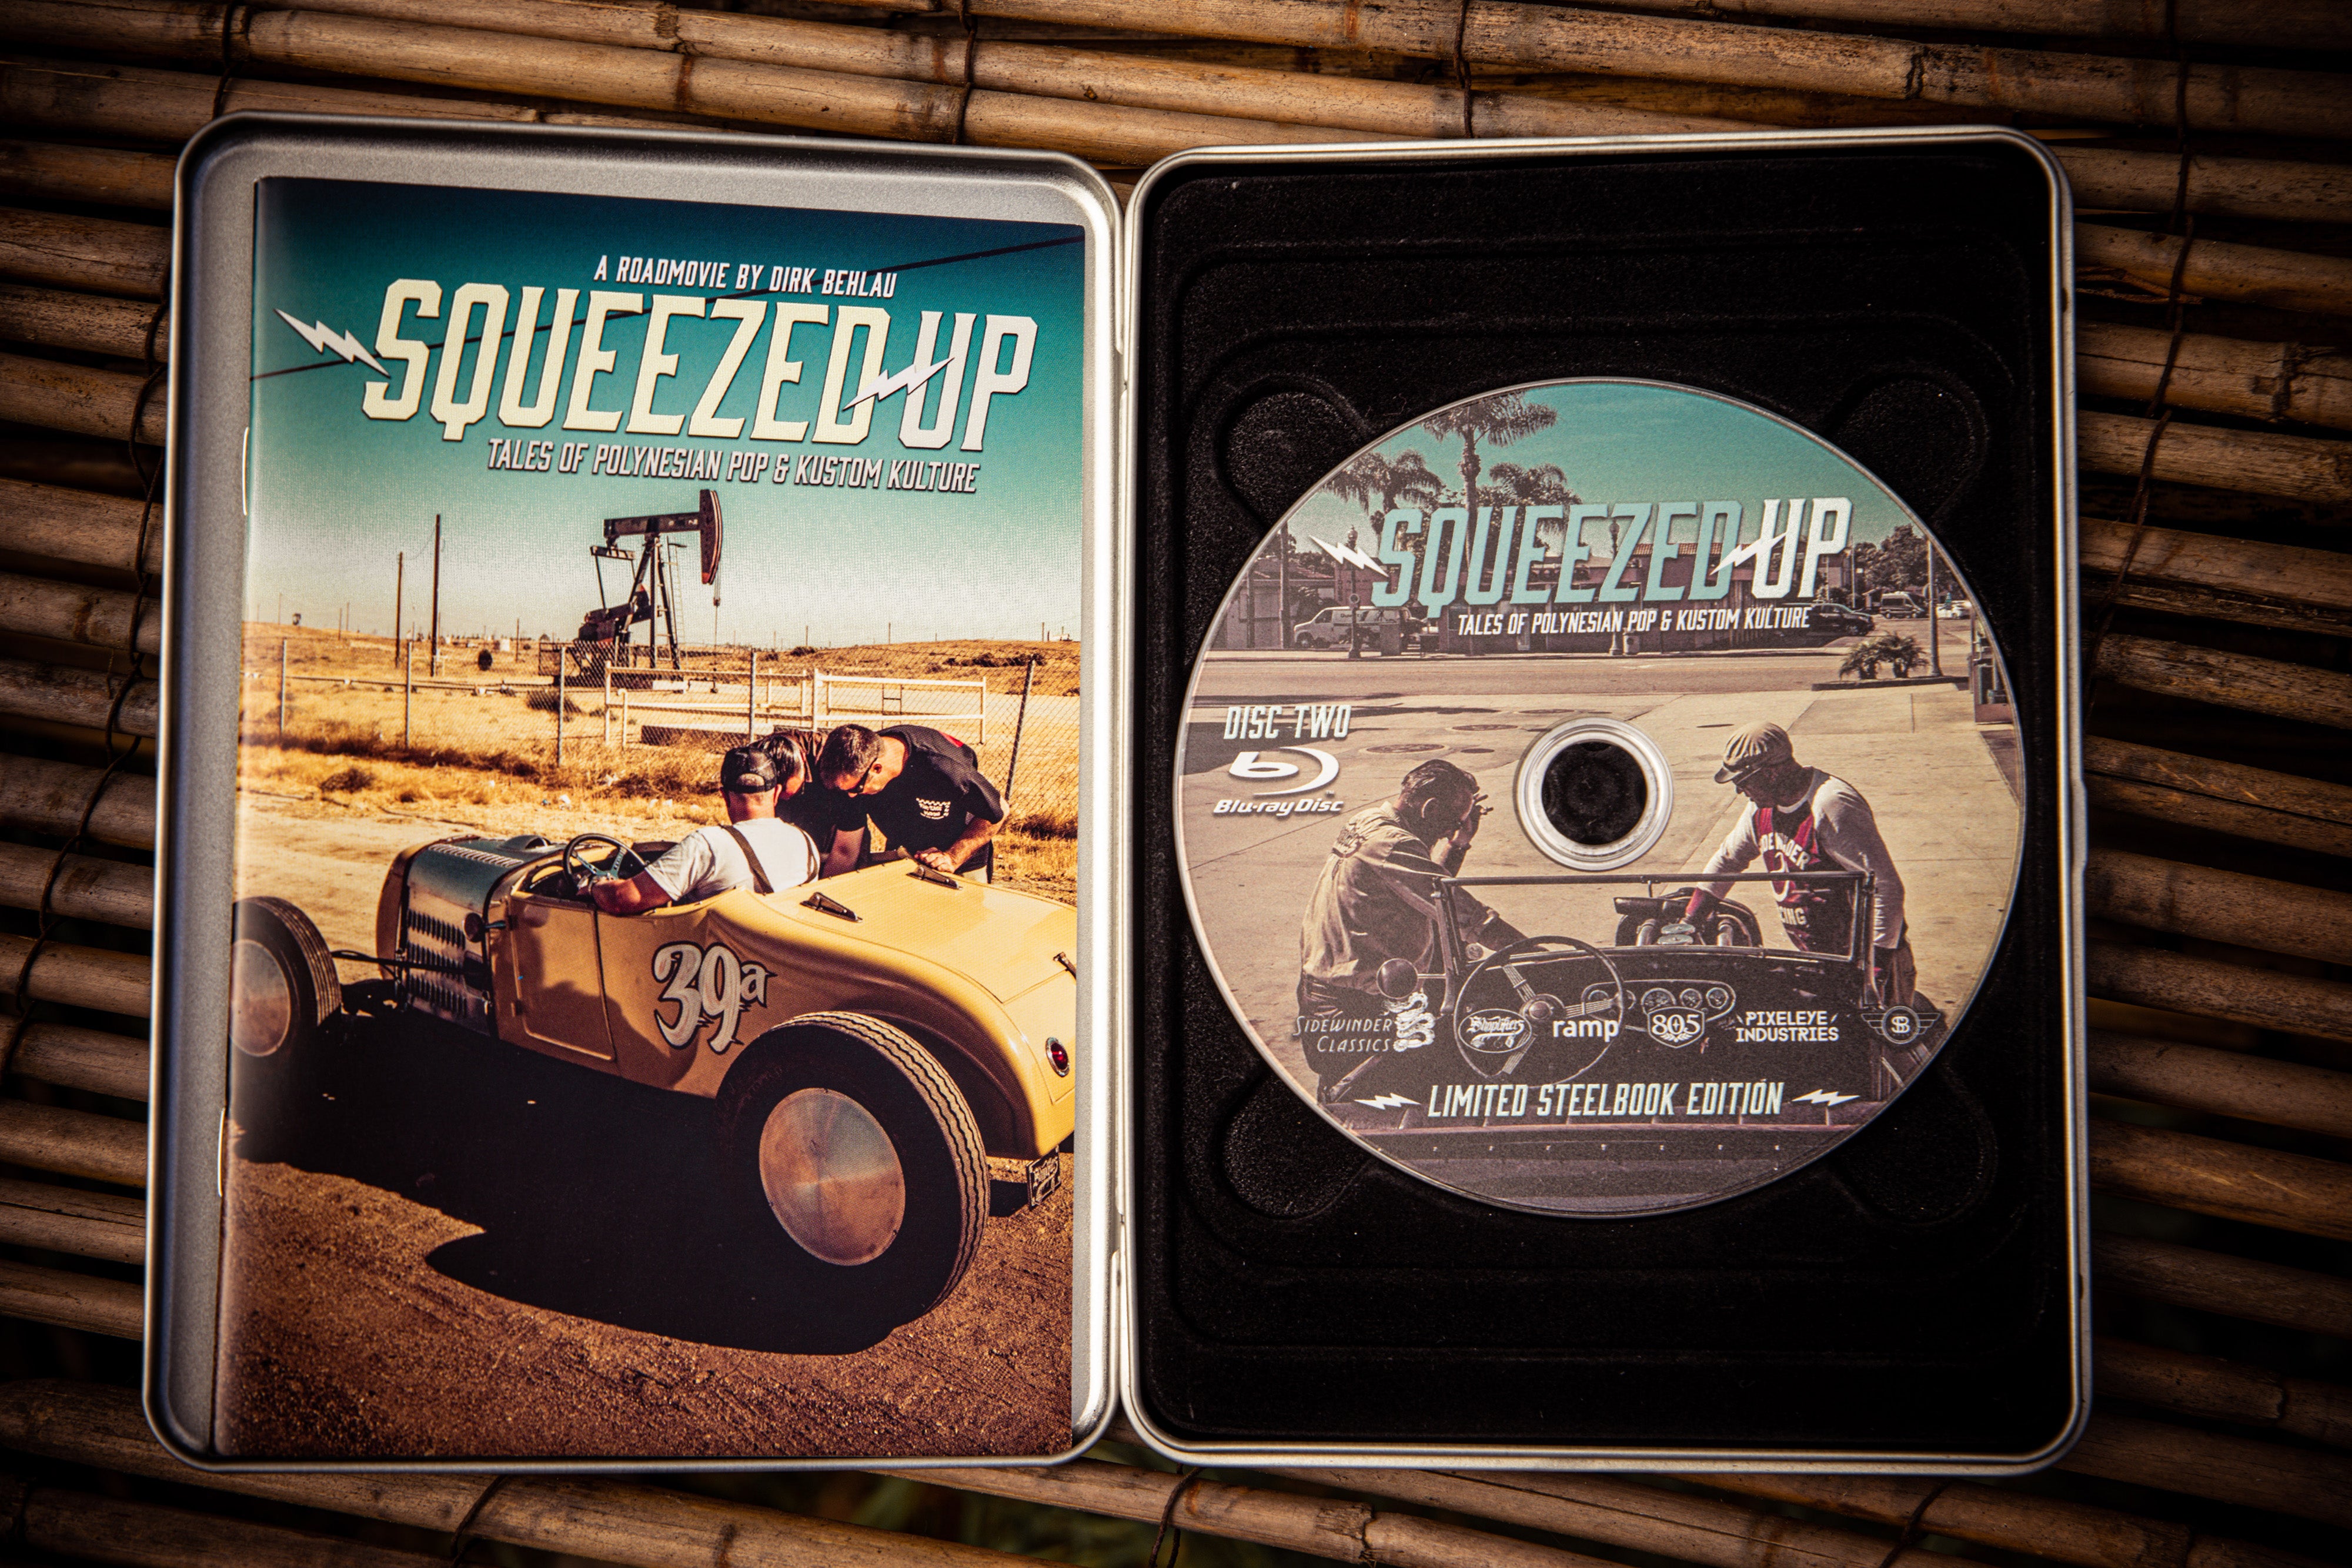 DVD & BLU-RAY "SQUEEZED UP"